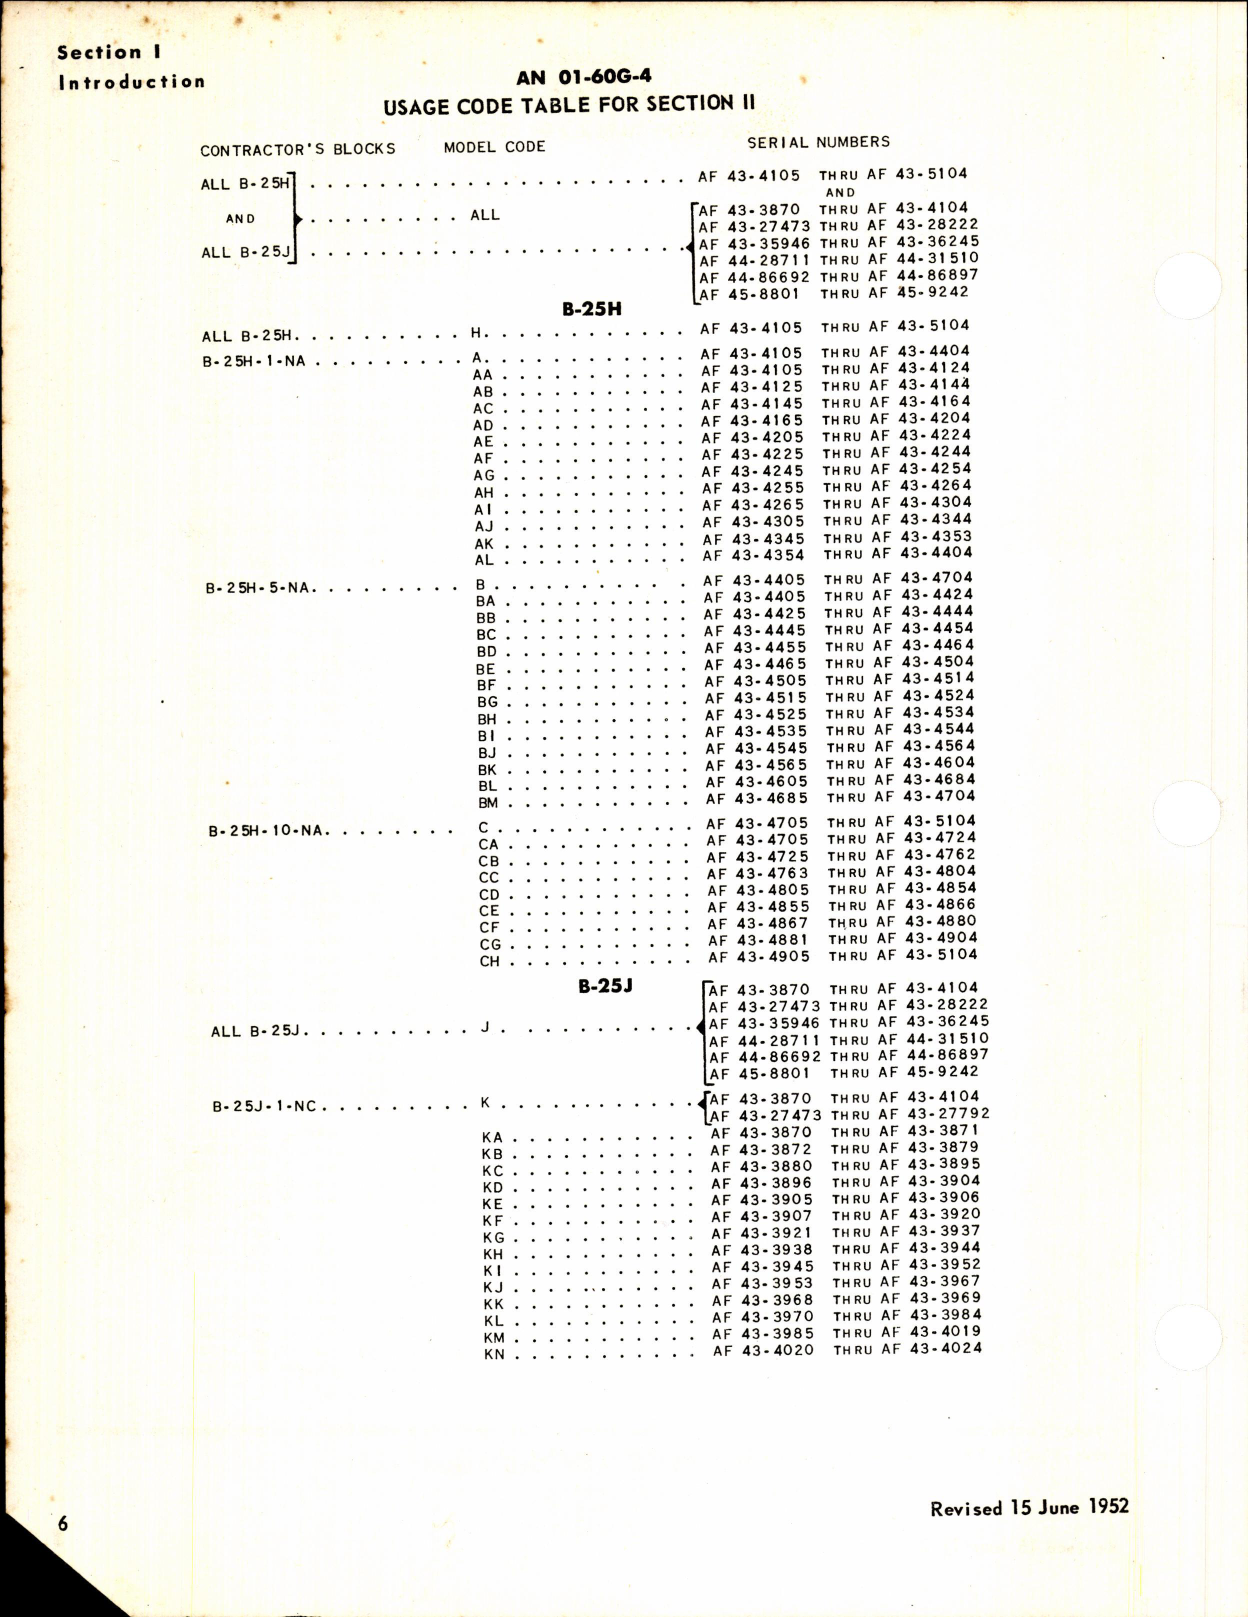 Sample page 8 from AirCorps Library document: Parts Catalog for B-25H and B-25J